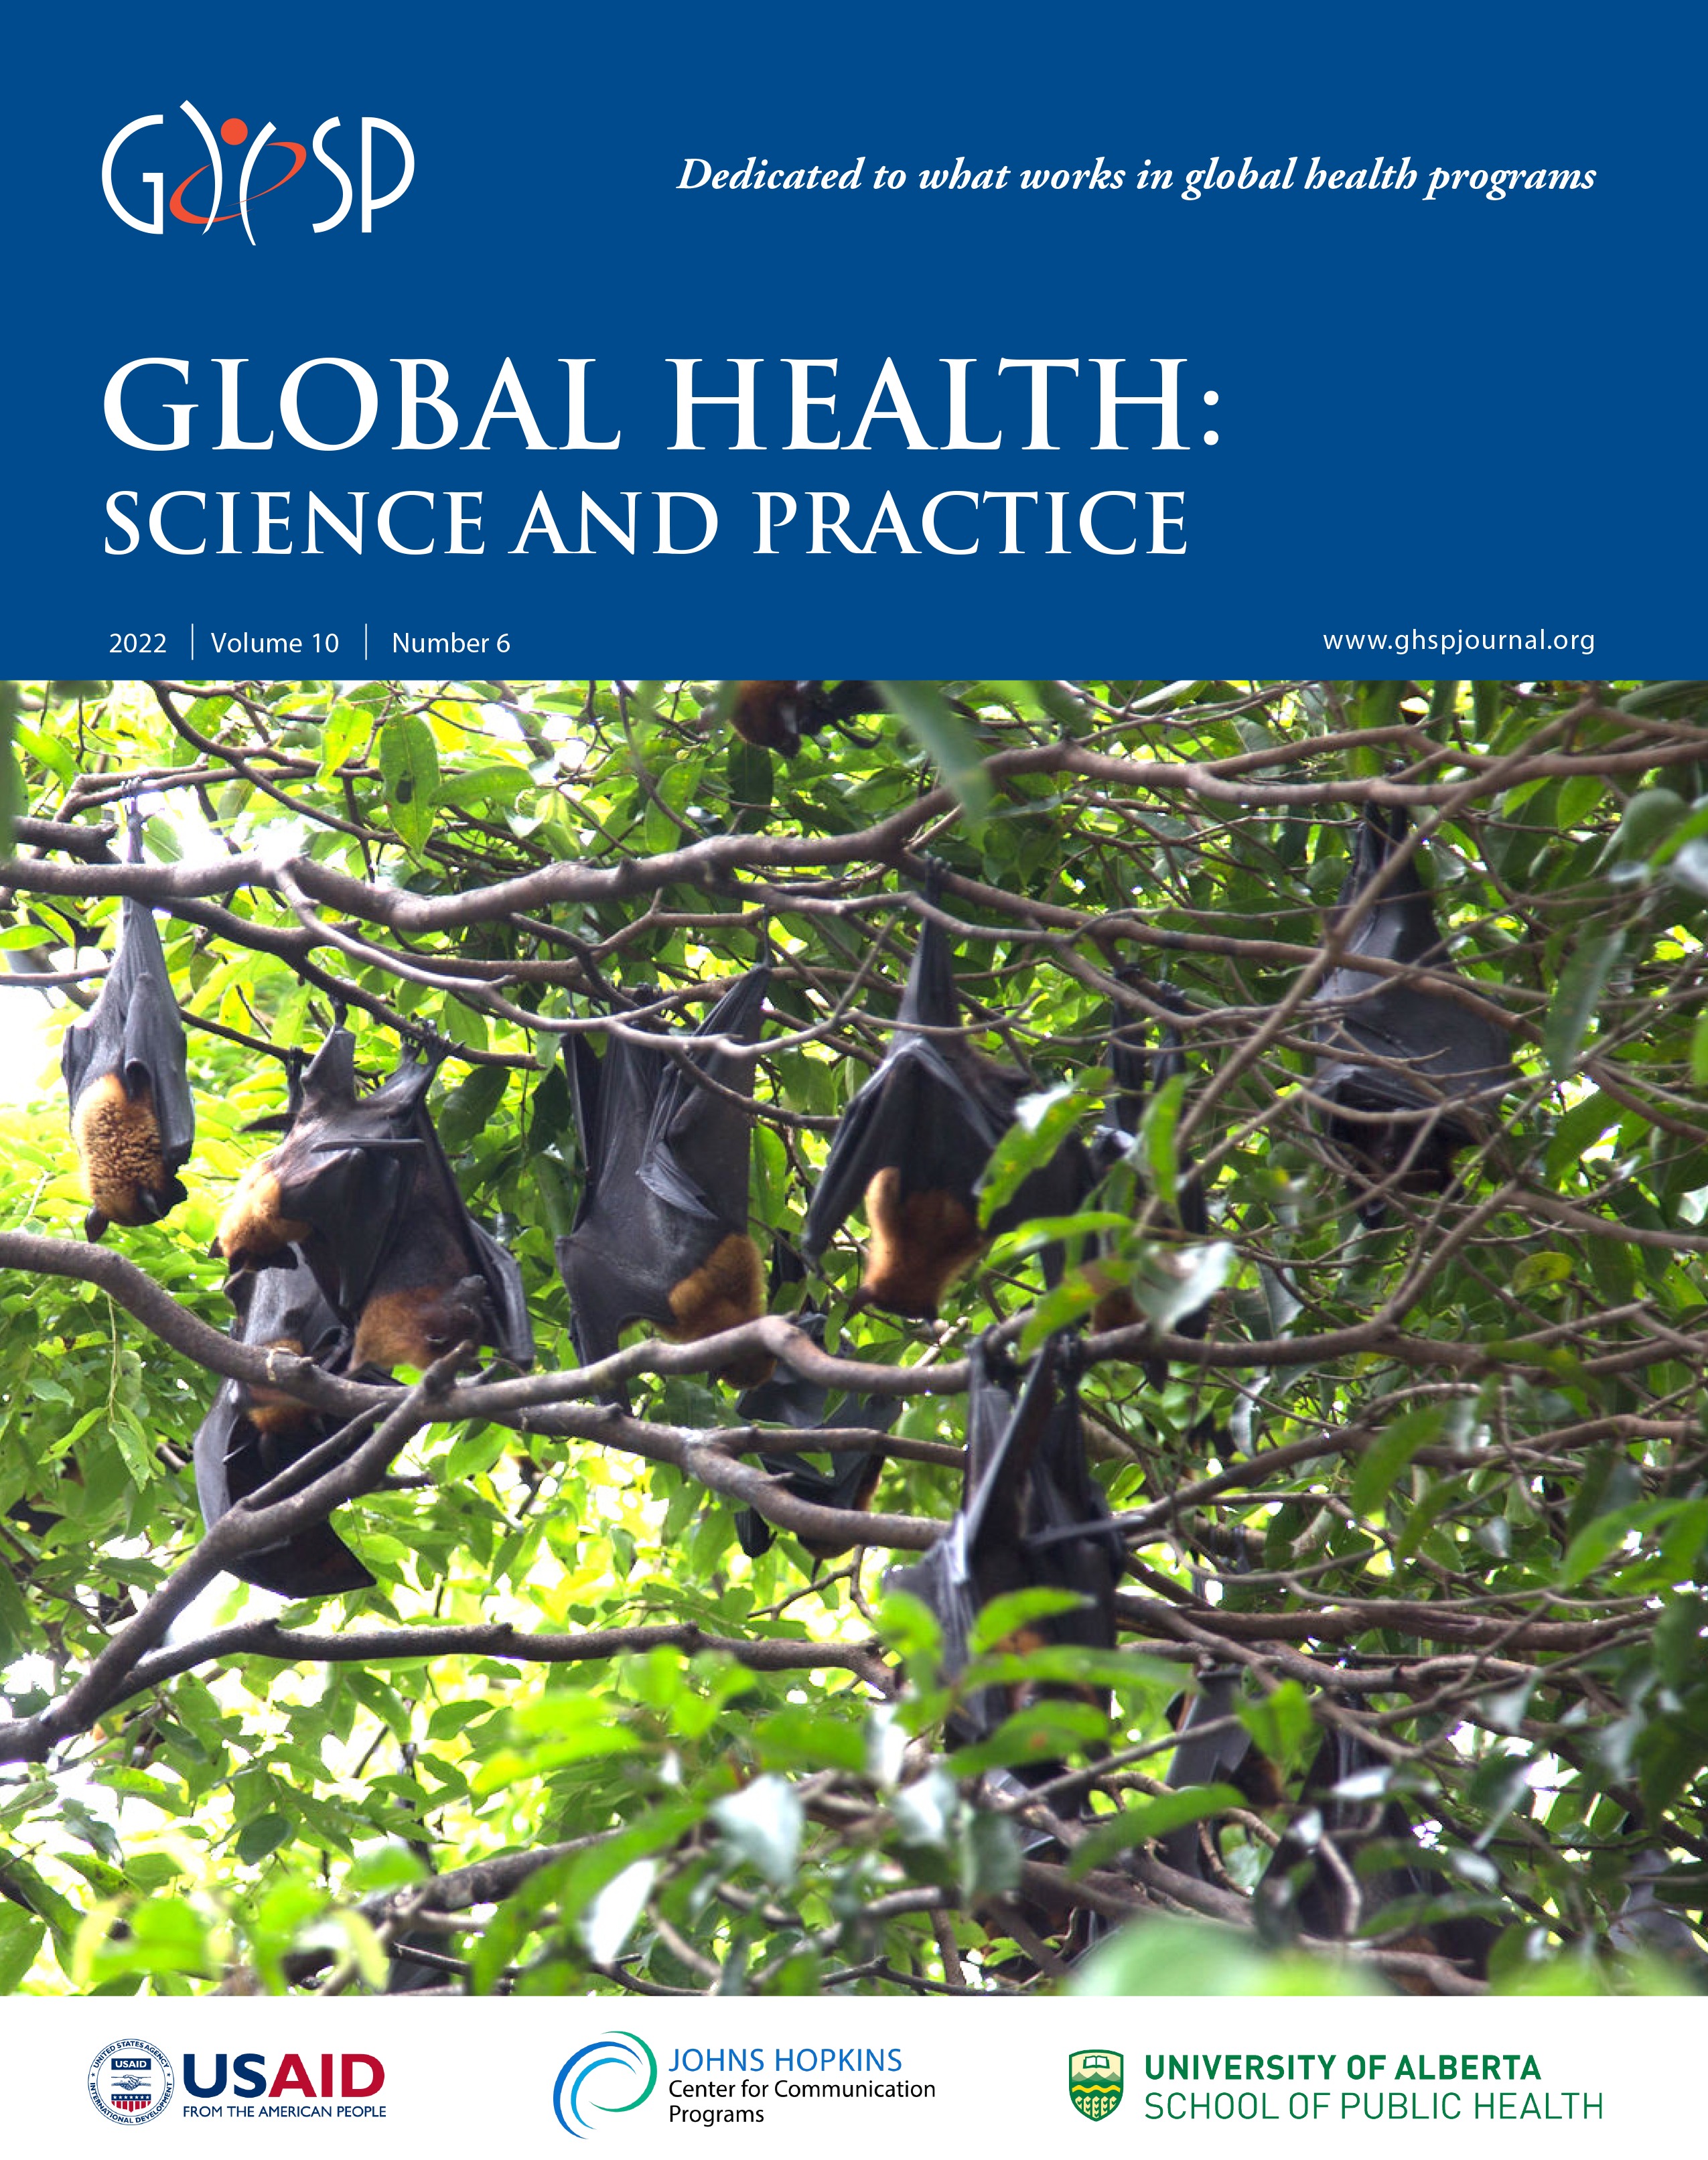 Living Safely With Bats: Lessons in Developing and Sharing a Global One Health Educational Resource